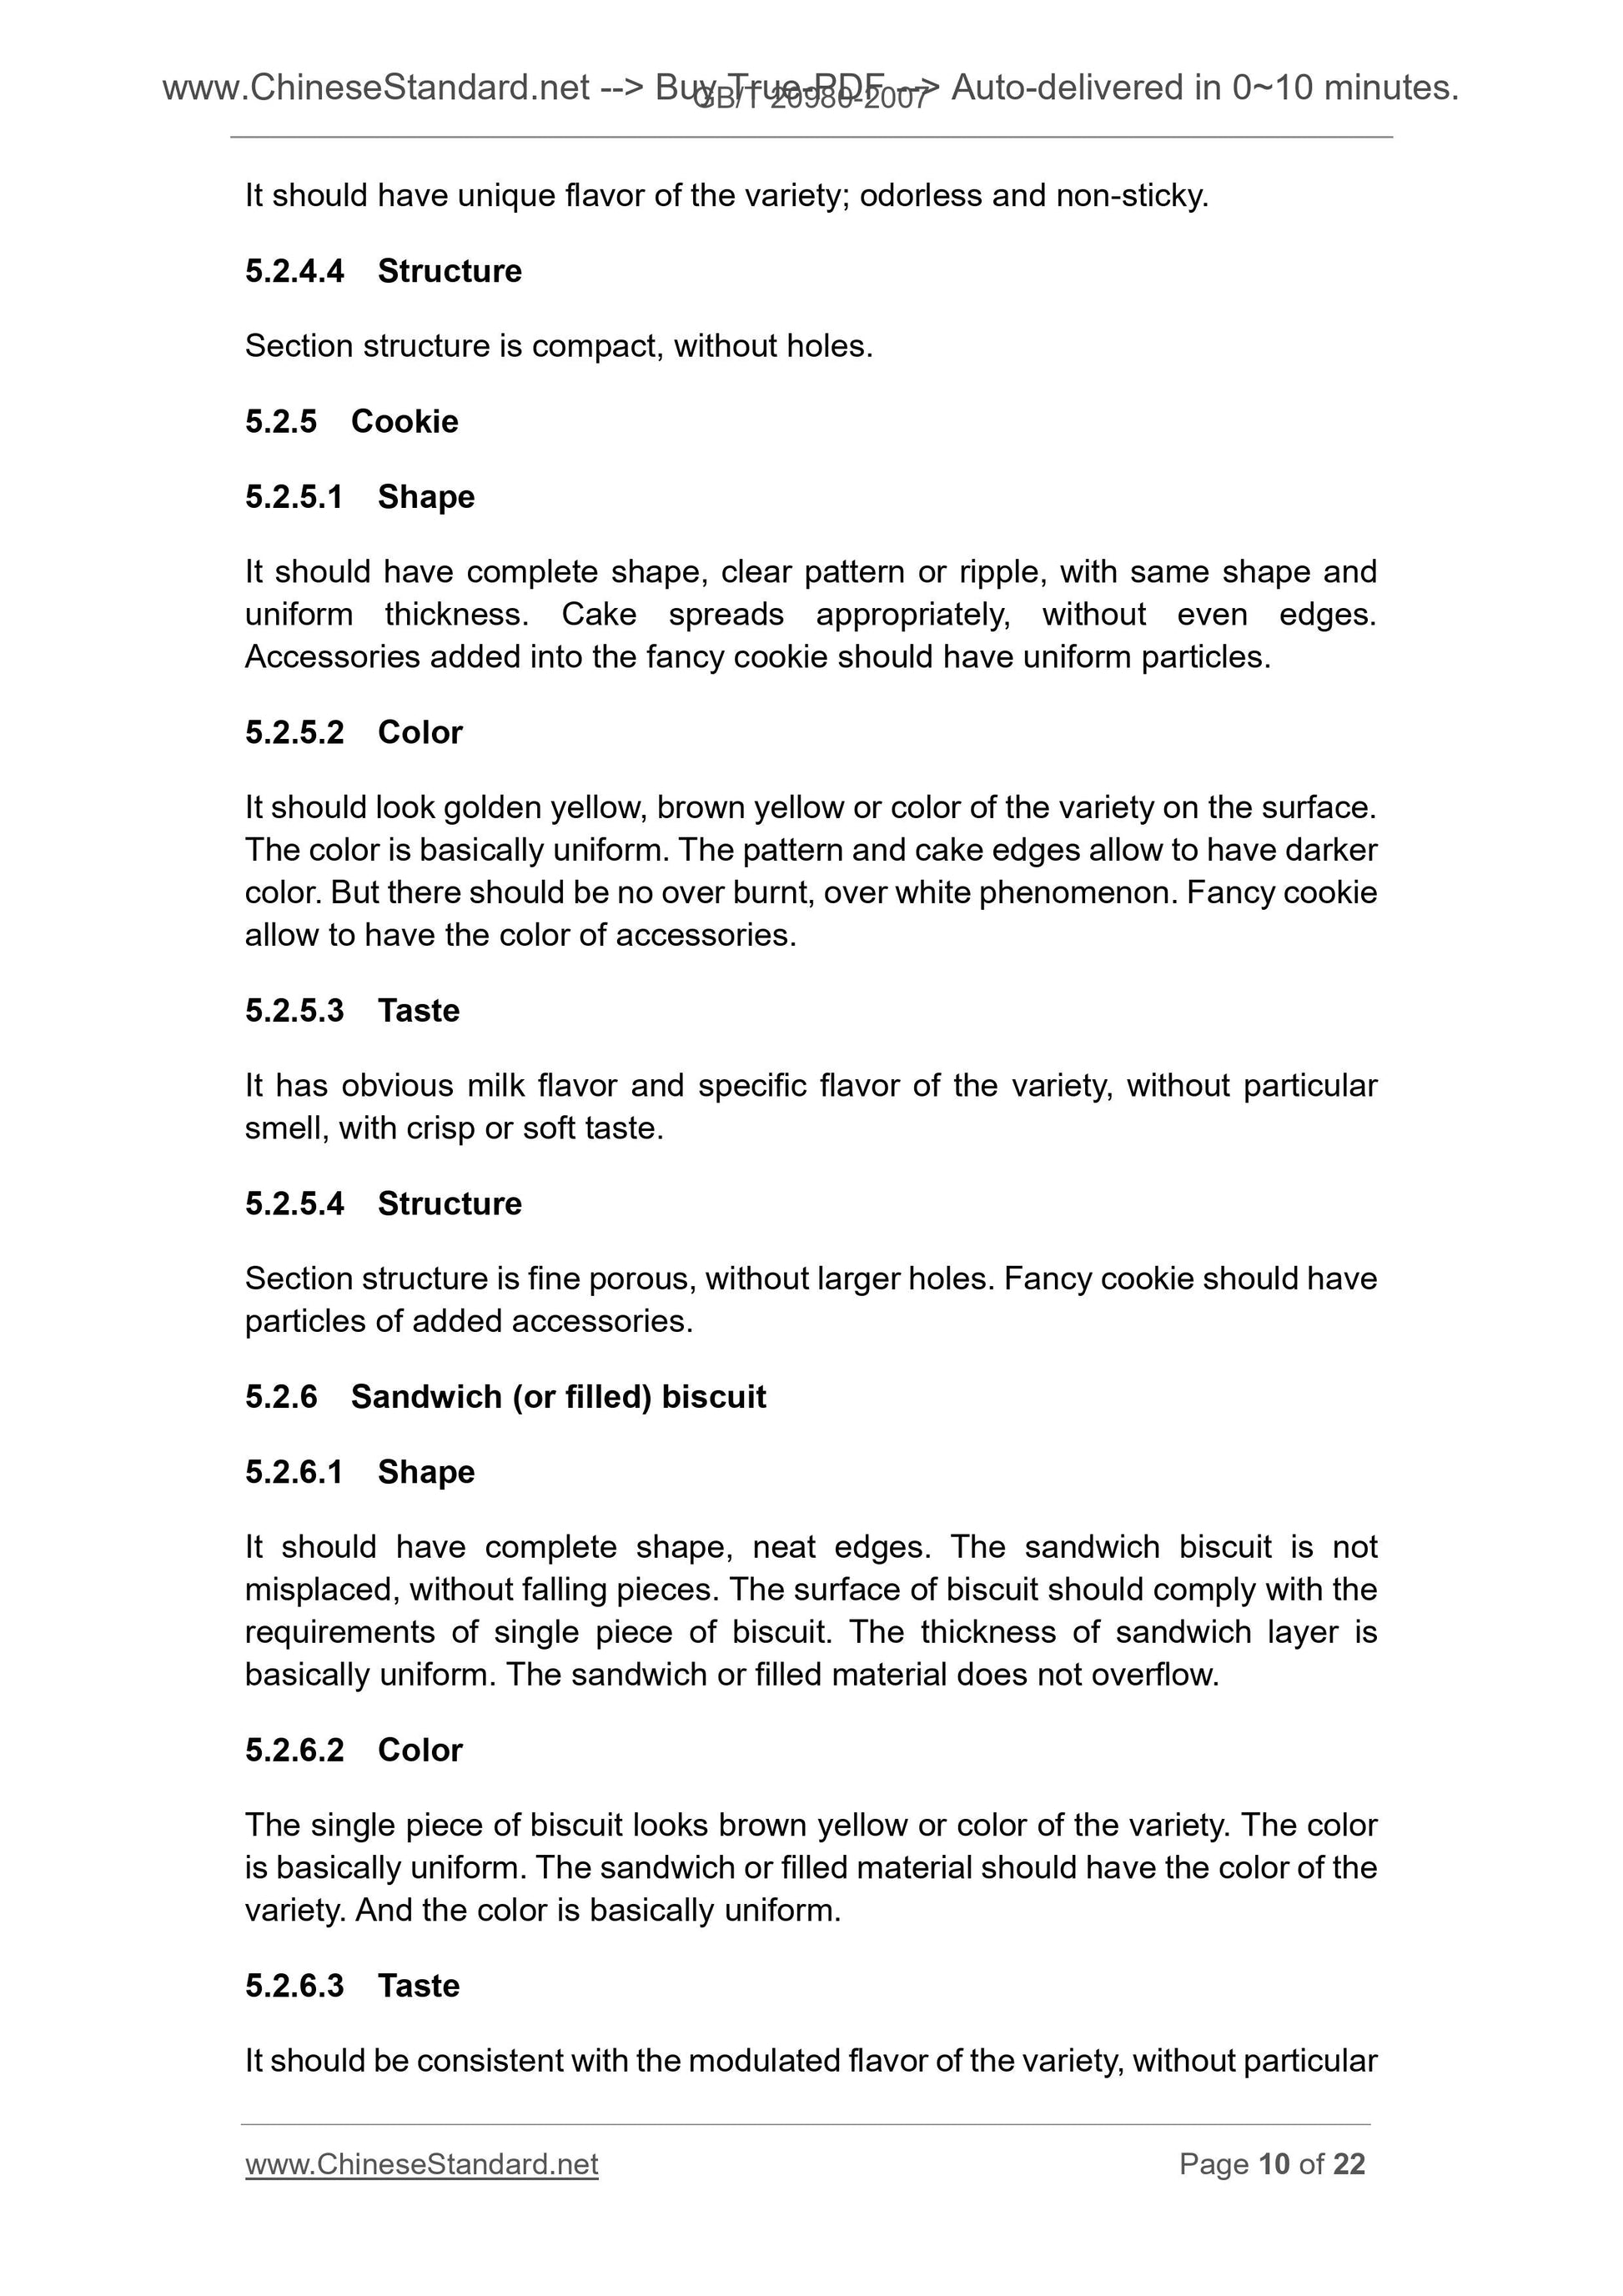 GB/T 20980-2007 Page 7